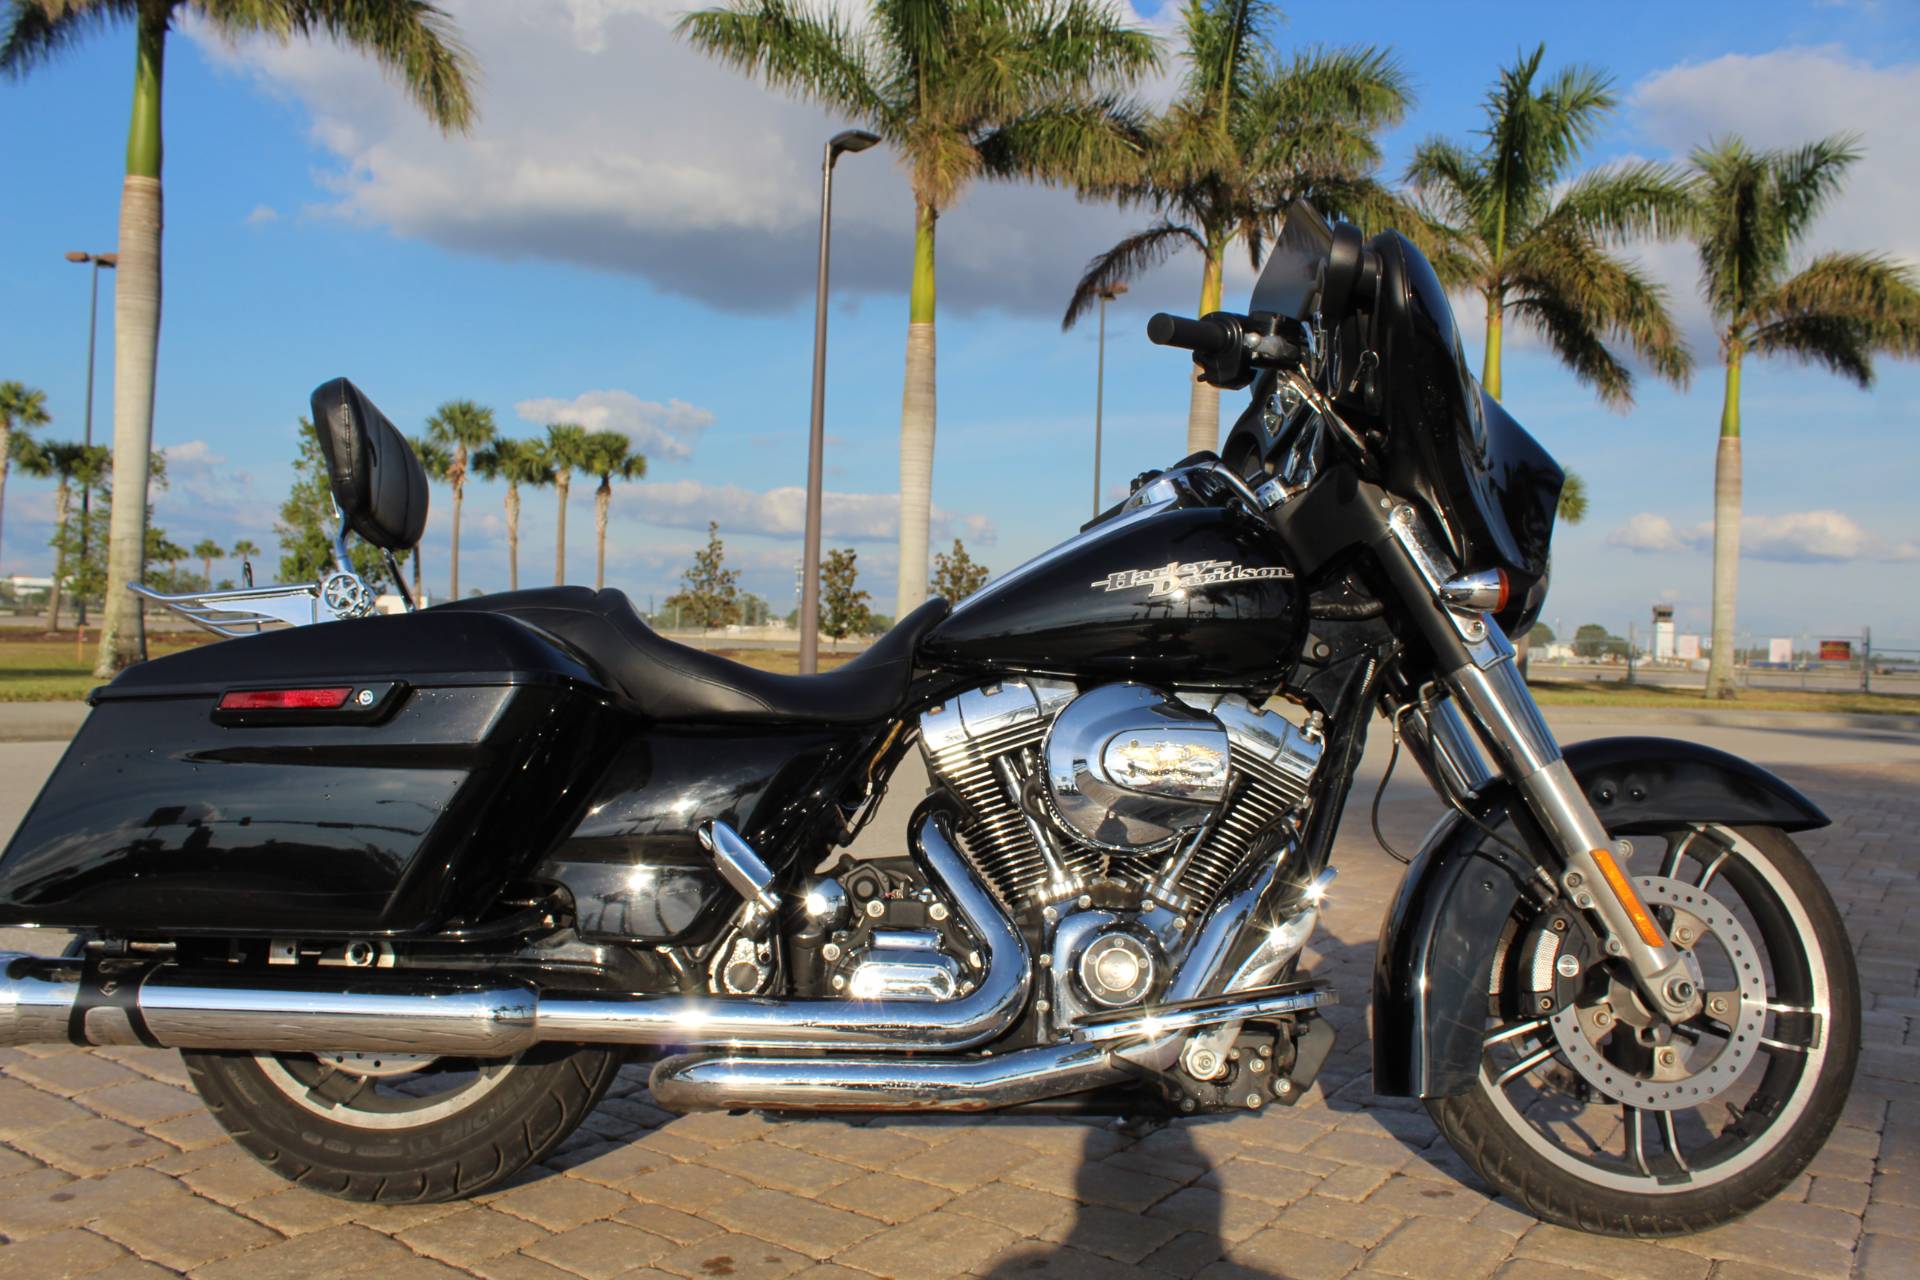 Used 2014 Harley-Davidson Street Glide ® Motorcycles in Fort Myers, FL Stoc...